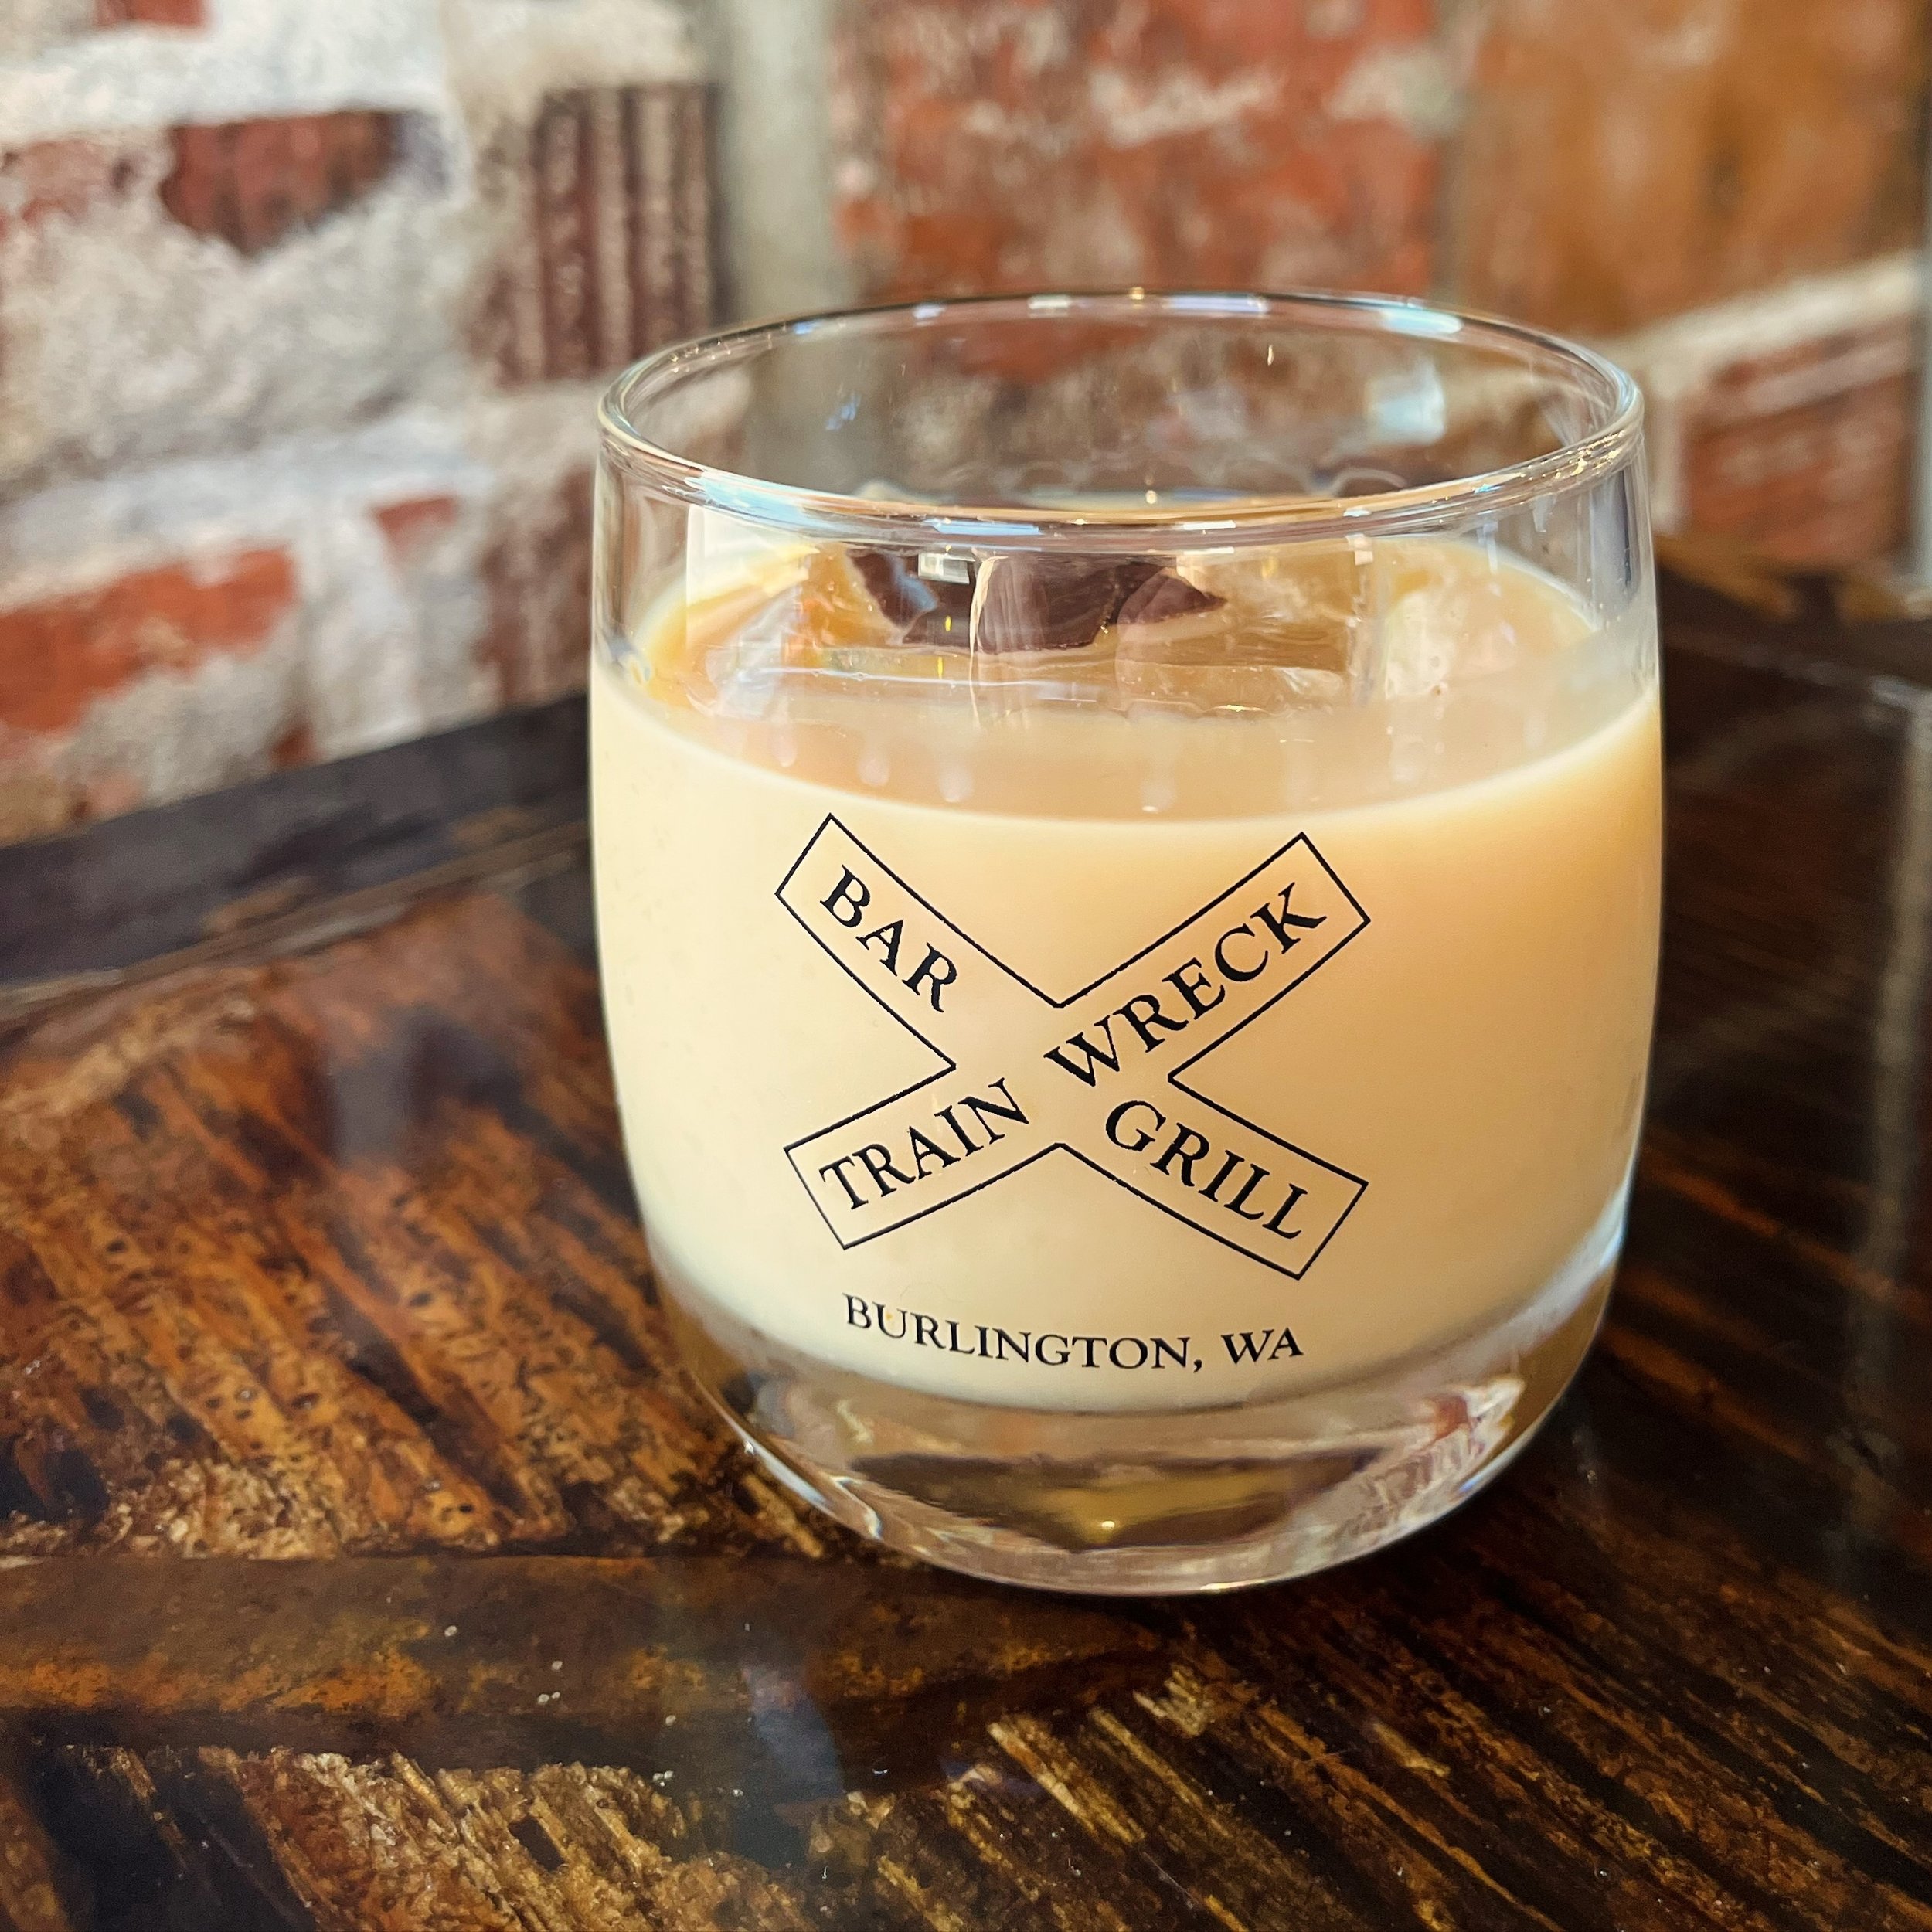 Salted Caramel Old Fashioned for Whiskey Tuesday. Made with Tullamore Dew Irish Whiskey and Dorda Salted Caramel liqueur, topped with chocolate flakes, $12.